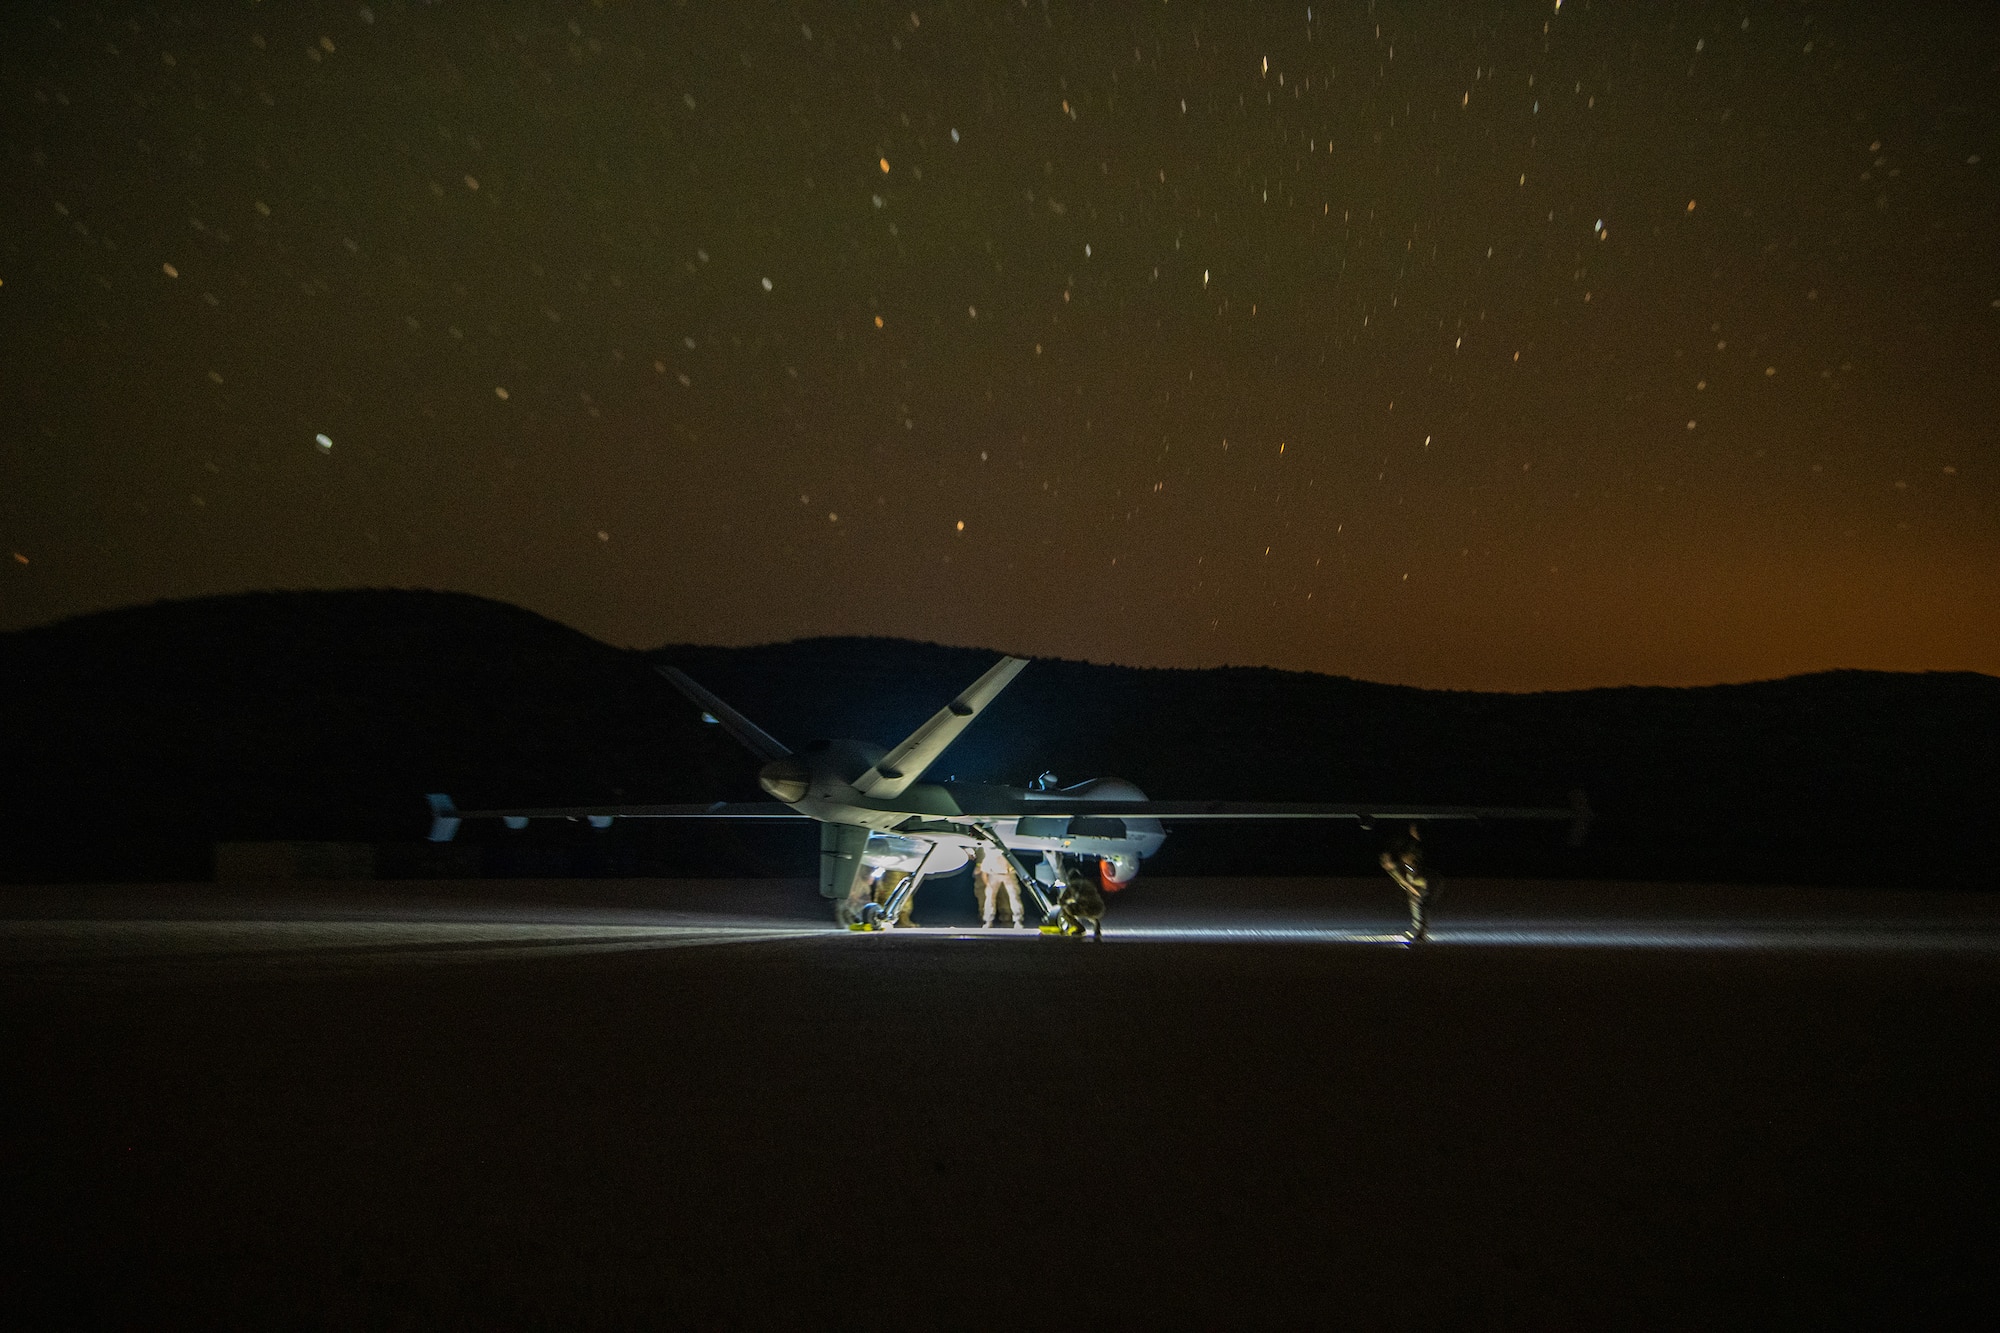 aircraft sits on dirt path at night under the stars